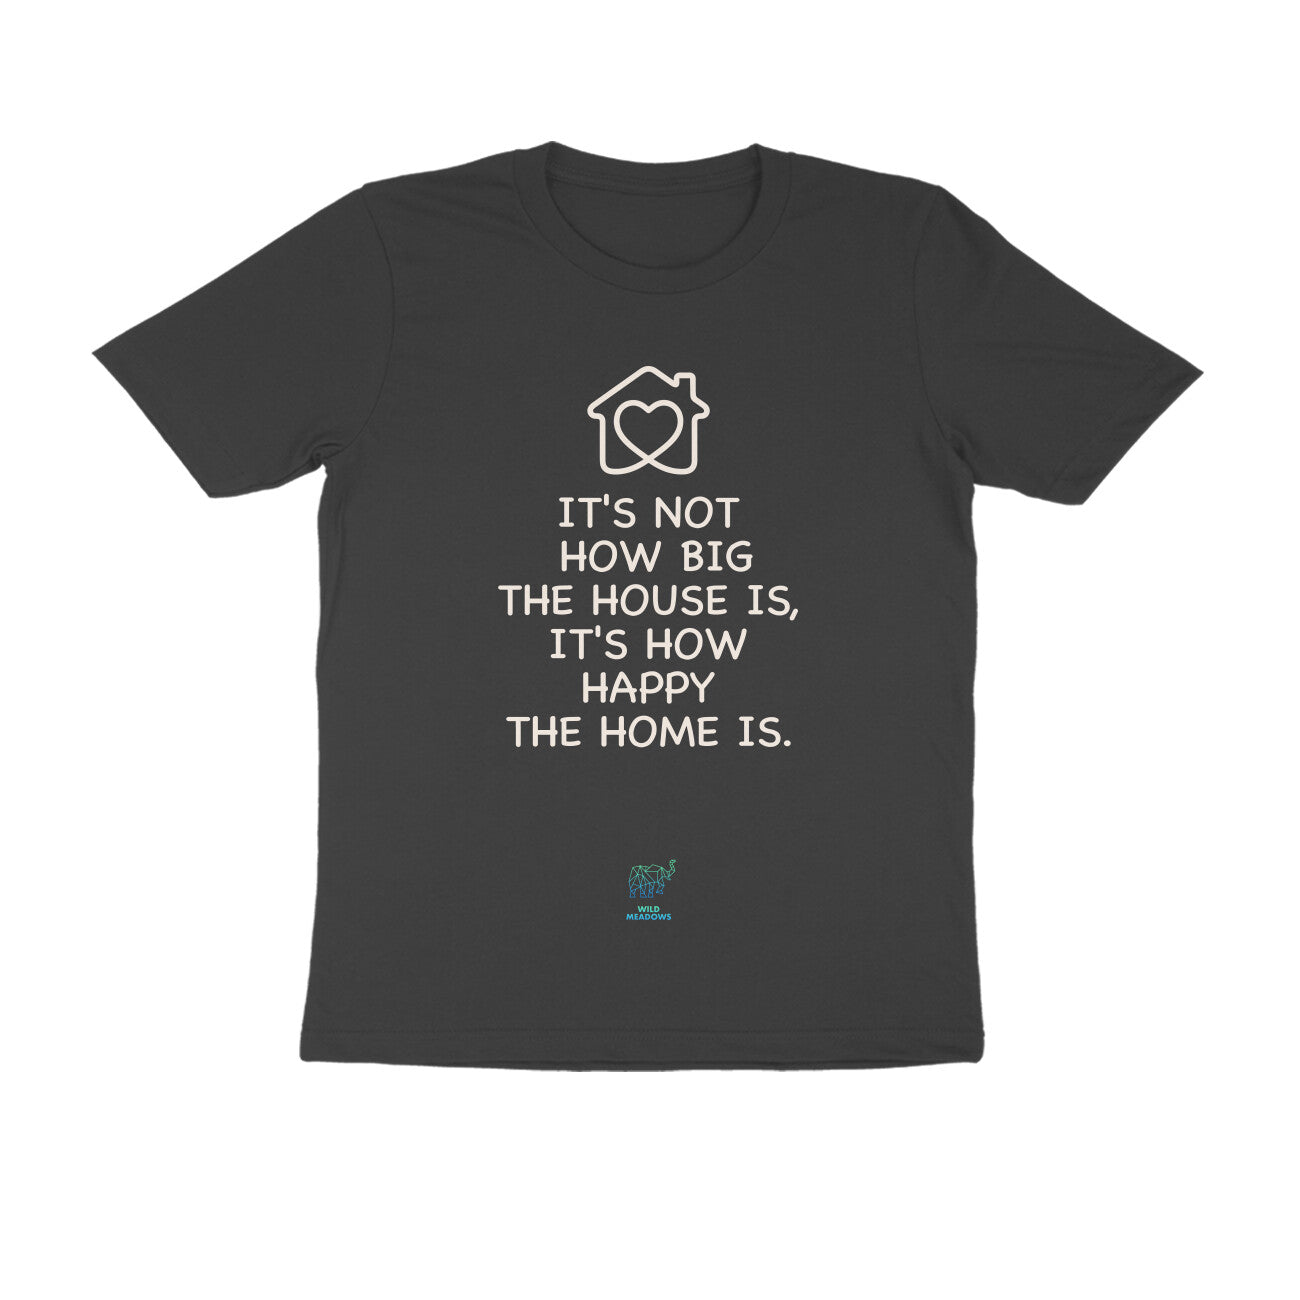 Gospel ( It's not how big the house is, it's how happy the home is )-Unisex Tees